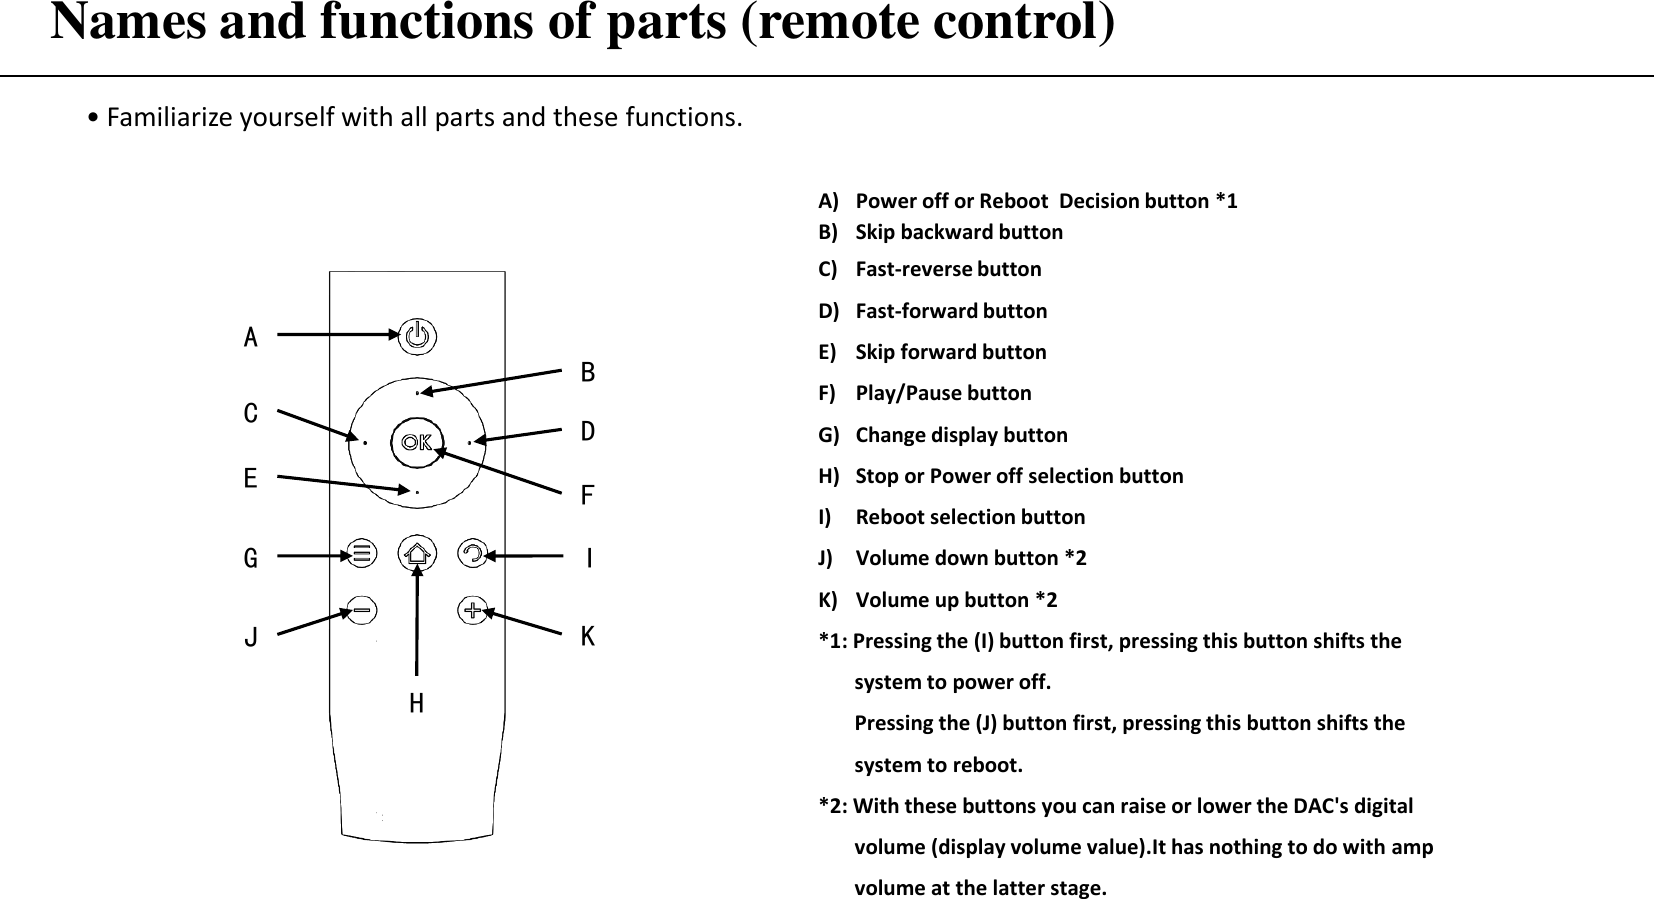 Names and functions of parts (remote control) A) Power off or Reboot  Decision button *1 B) Skip backward button C) Fast-reverse button D) Fast-forward button E) Skip forward button F) Play/Pause button G) Change display button H) Stop or Power off selection button I) Reboot selection button  J) Volume down button *2 K) Volume up button *2 *1: Pressing the (I) button first, pressing this button shifts the        system to power off.        Pressing the (J) button first, pressing this button shifts the        system to reboot. *2: With these buttons you can raise or lower the DAC&apos;s digital        volume (display volume value).It has nothing to do with amp        volume at the latter stage. A F C  D B G H E I K J • Familiarize yourself with all parts and these functions. 